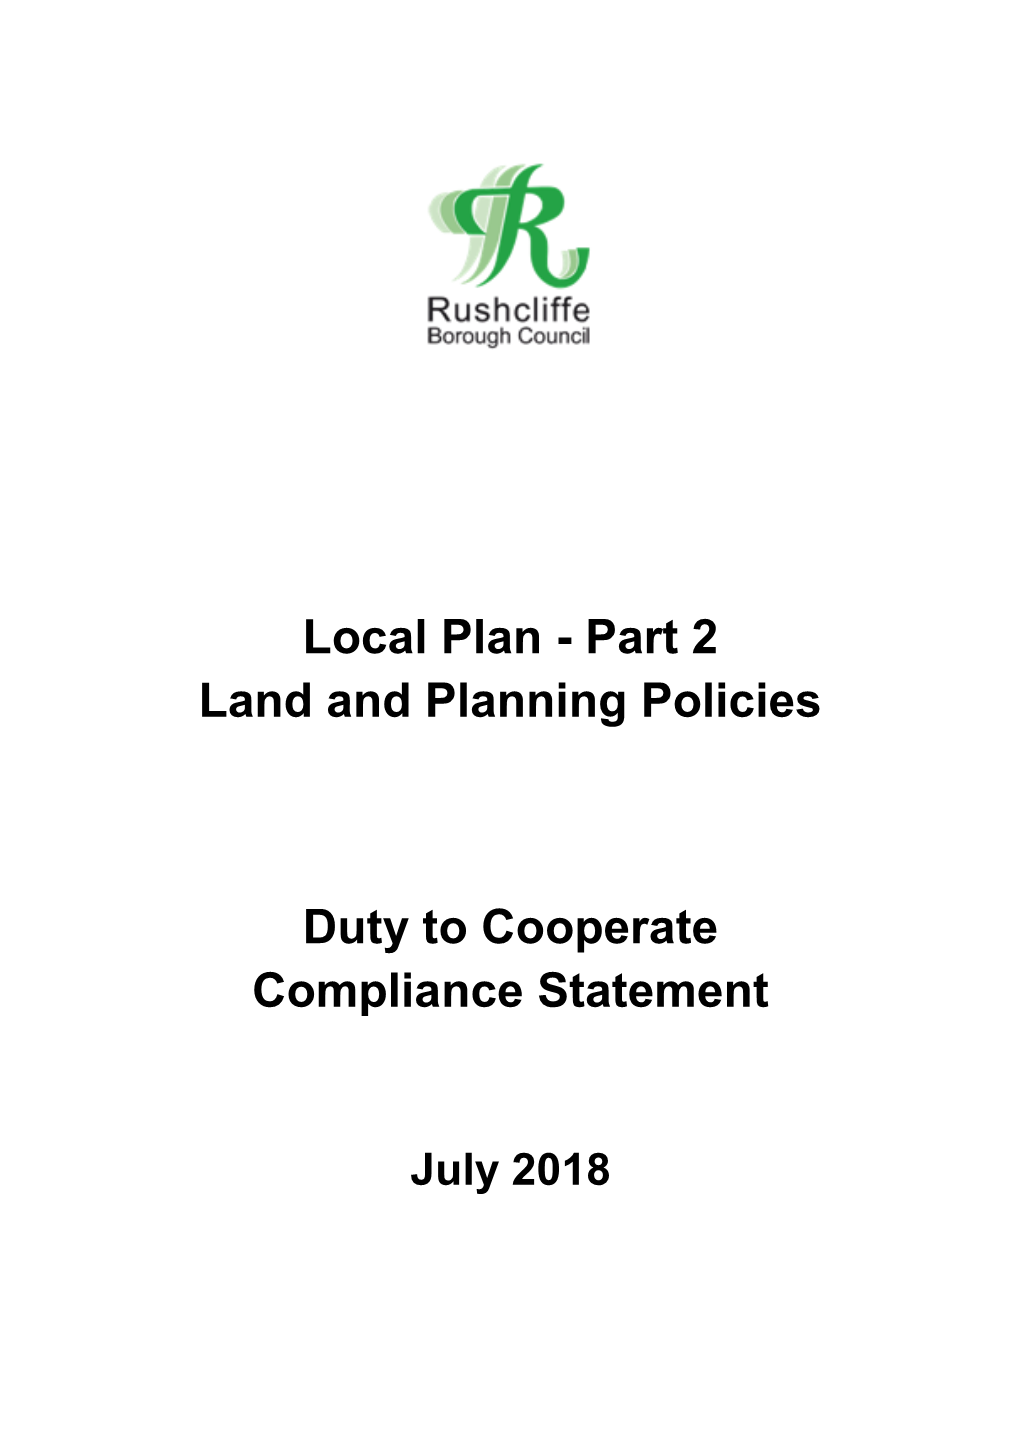 Local Plan - Part 2 Land and Planning Policies